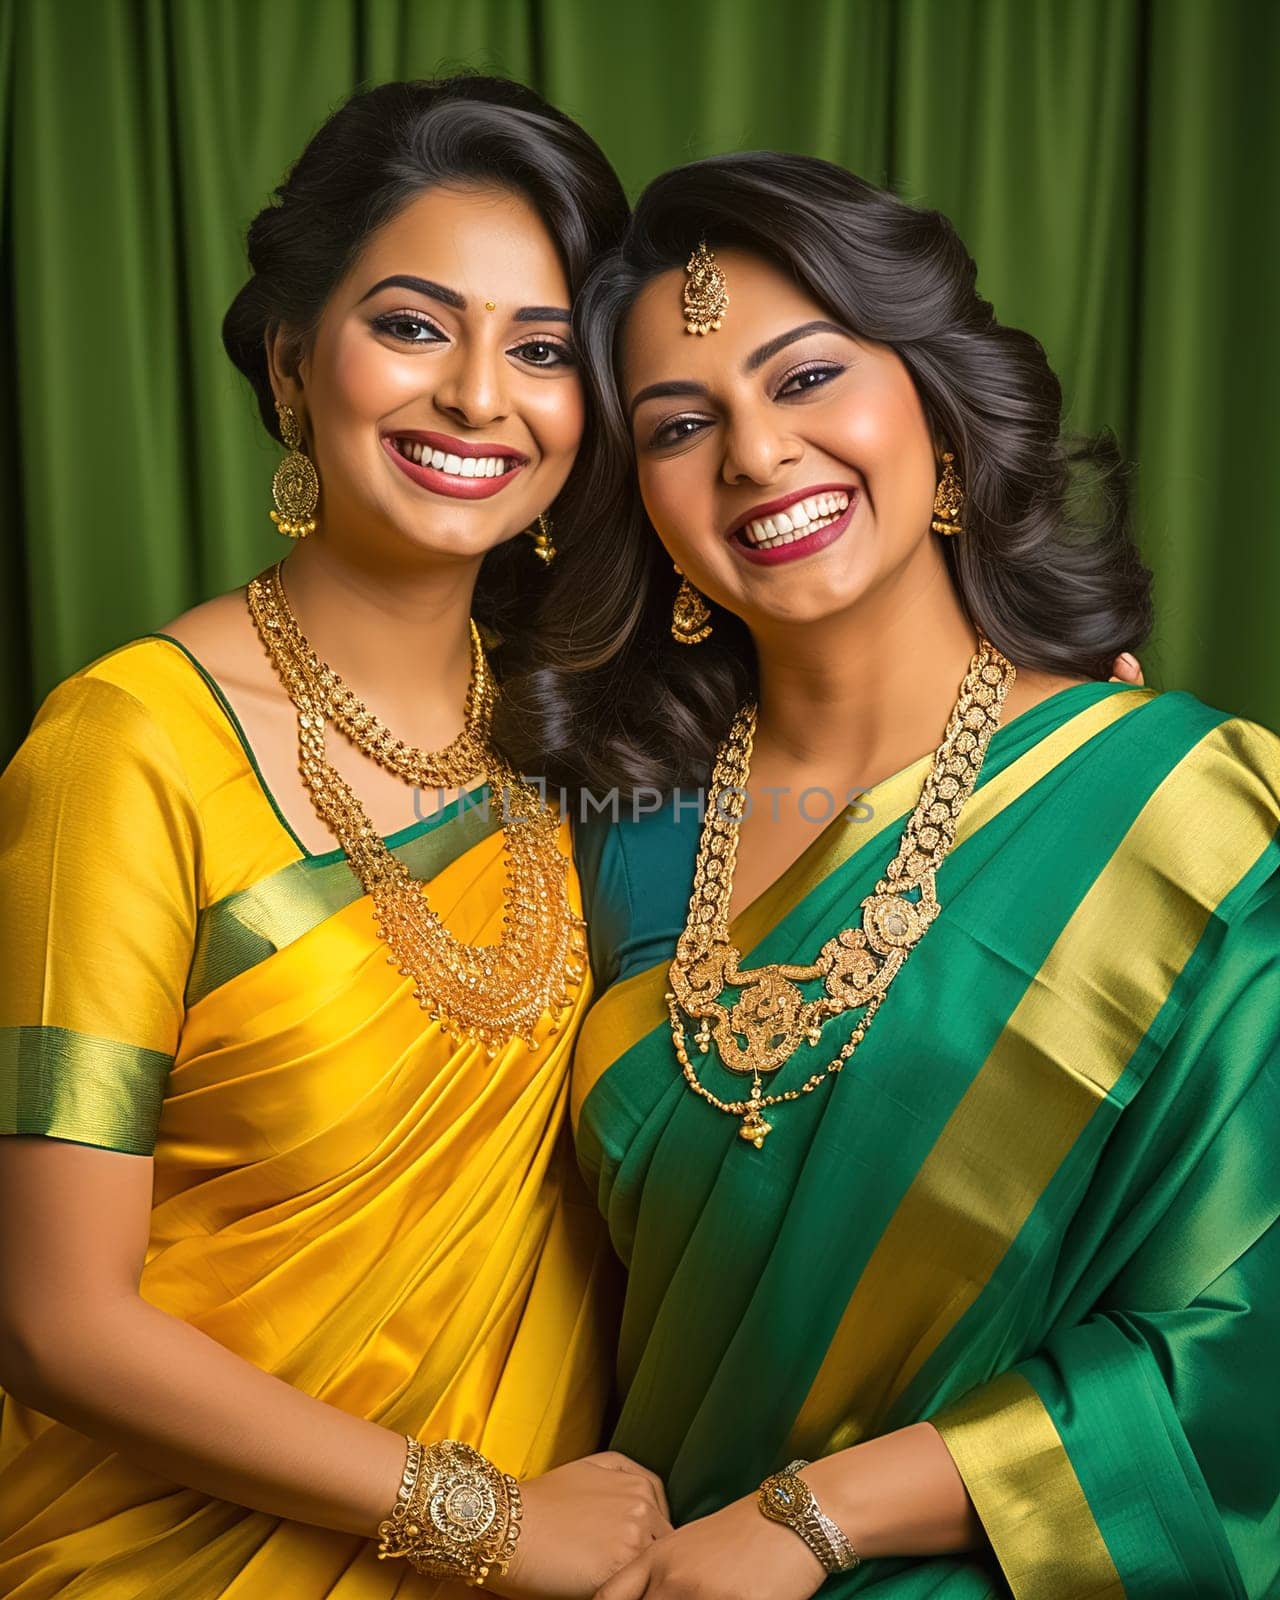 Portrait of two Indian women in yellow and green sari with jewelry. by Yurich32